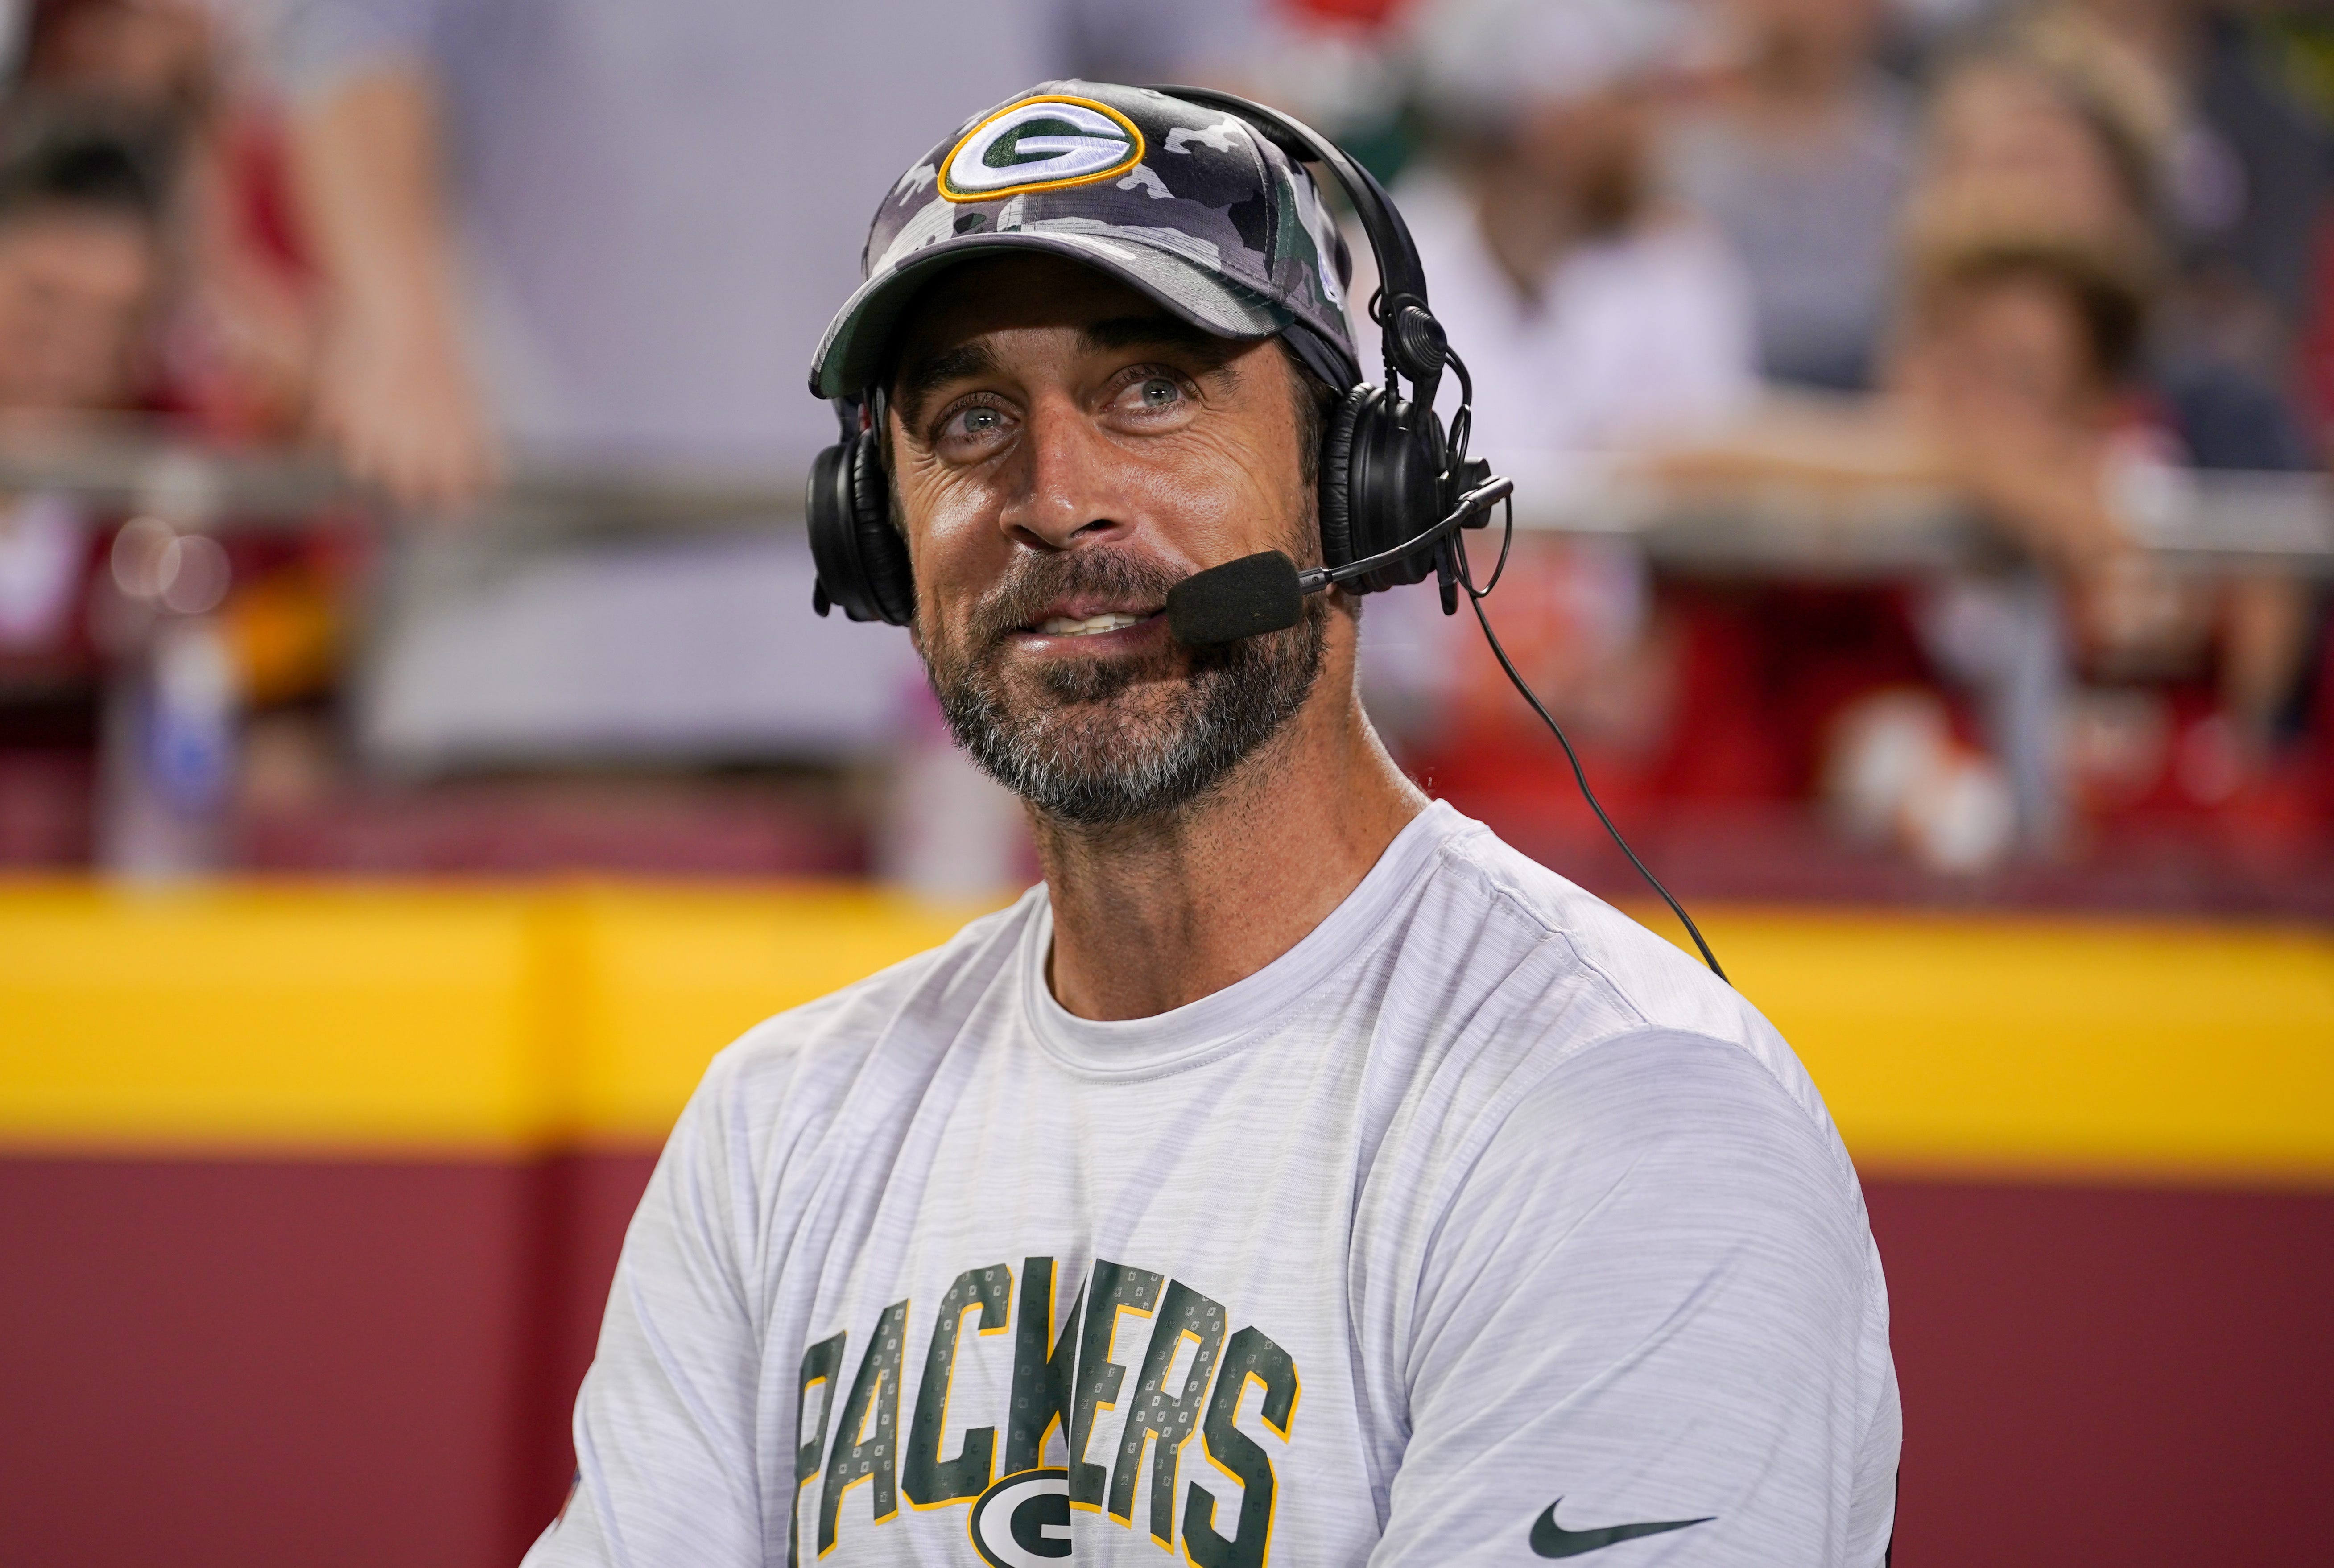 Packers QB Aaron Rodgers admits misleading media about vaccination status last season